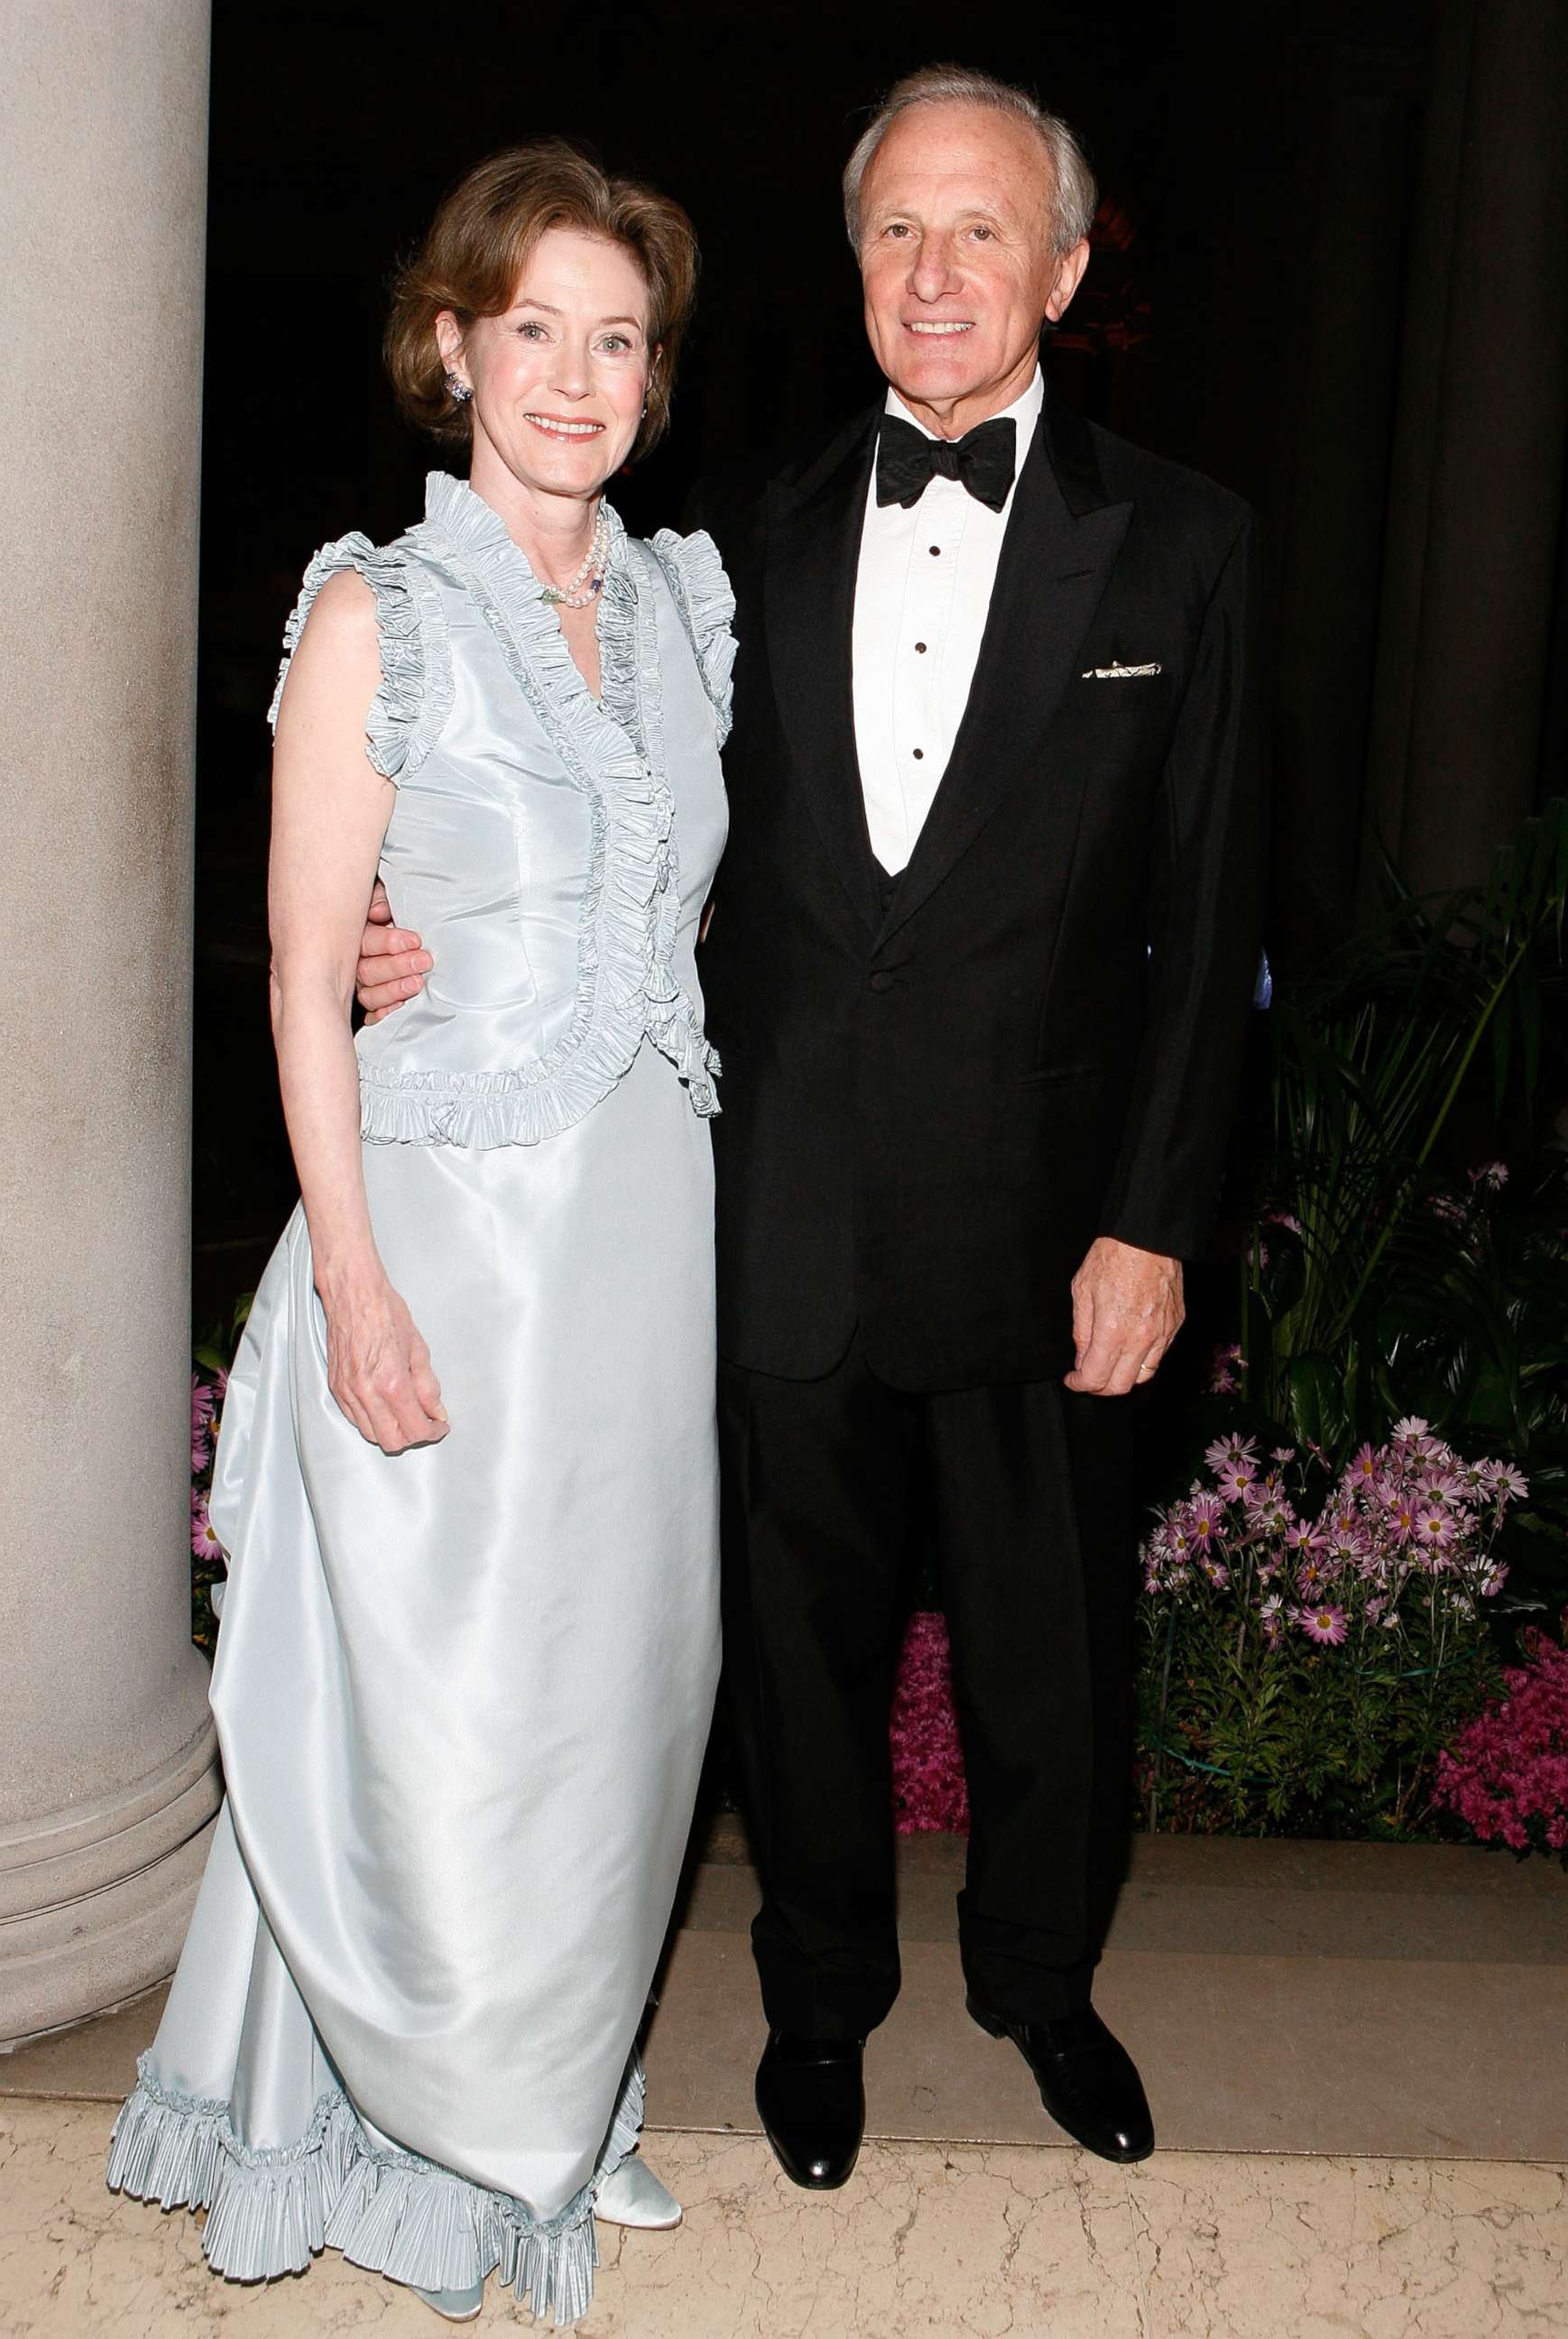 PHOTO: Kimba Wood and Frank Richardson attend an event at The Frick Collection on Oct. 19, 2009 in New York.